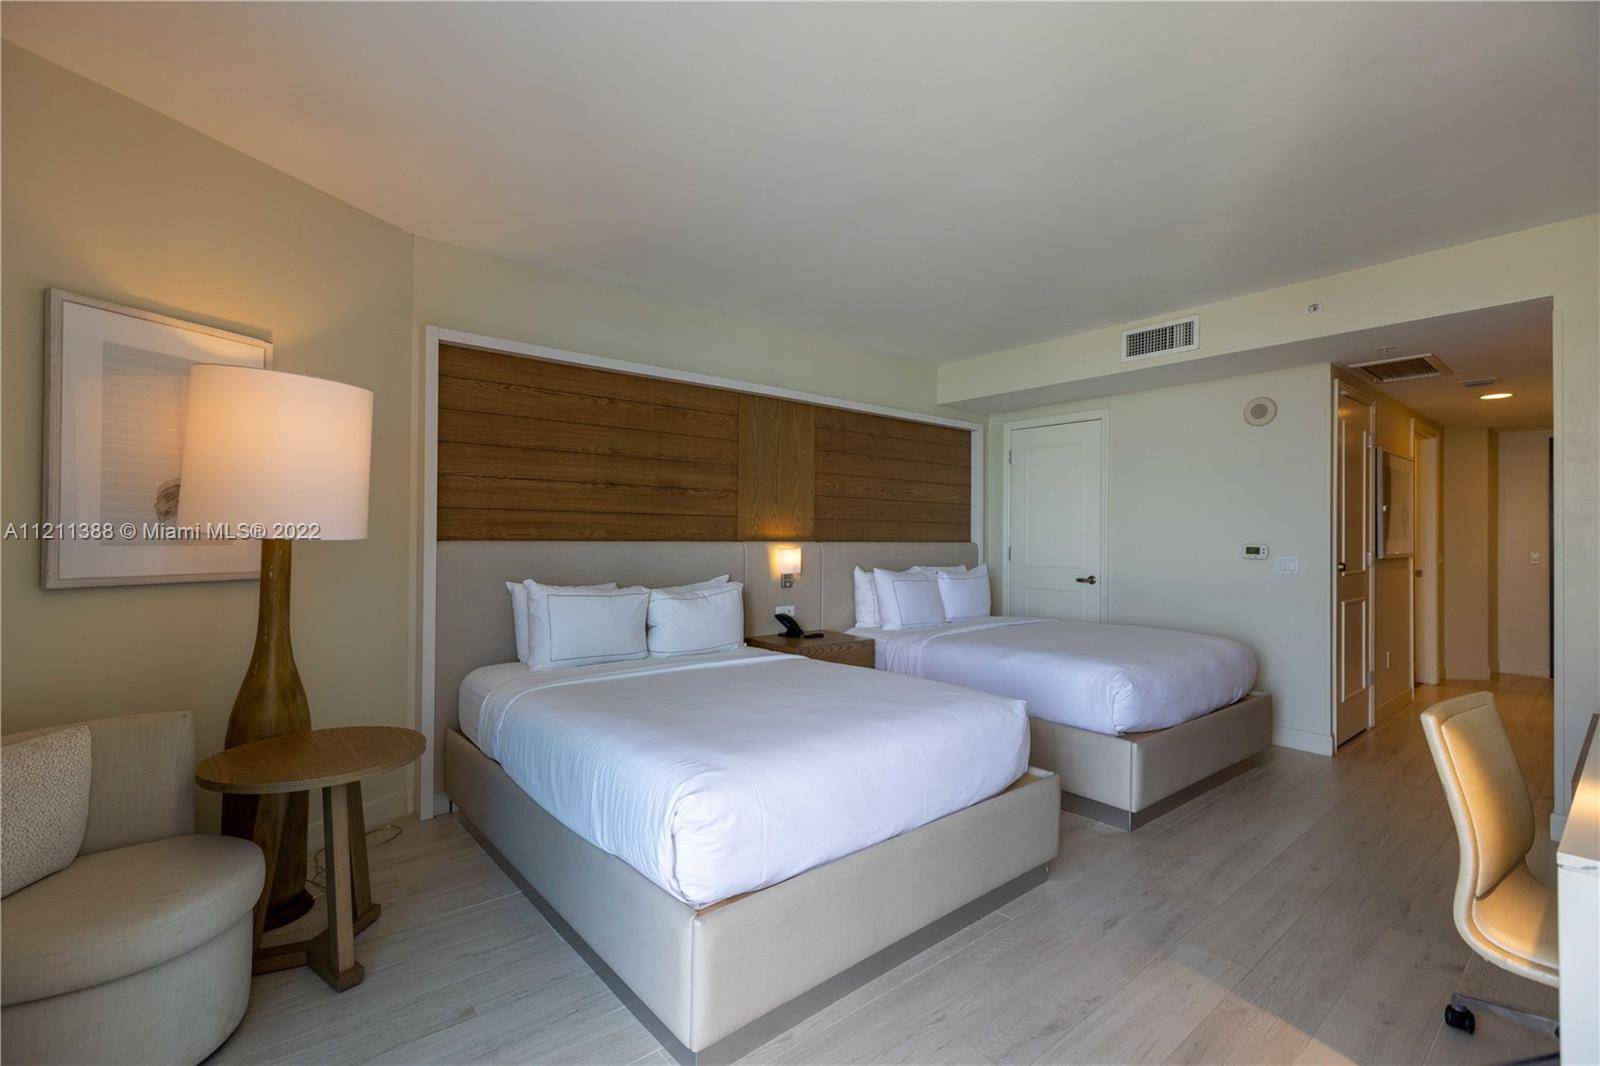 Welcome to the newly renovated Q Club, a condo hotel located on the beach in Fort Lauderdale.